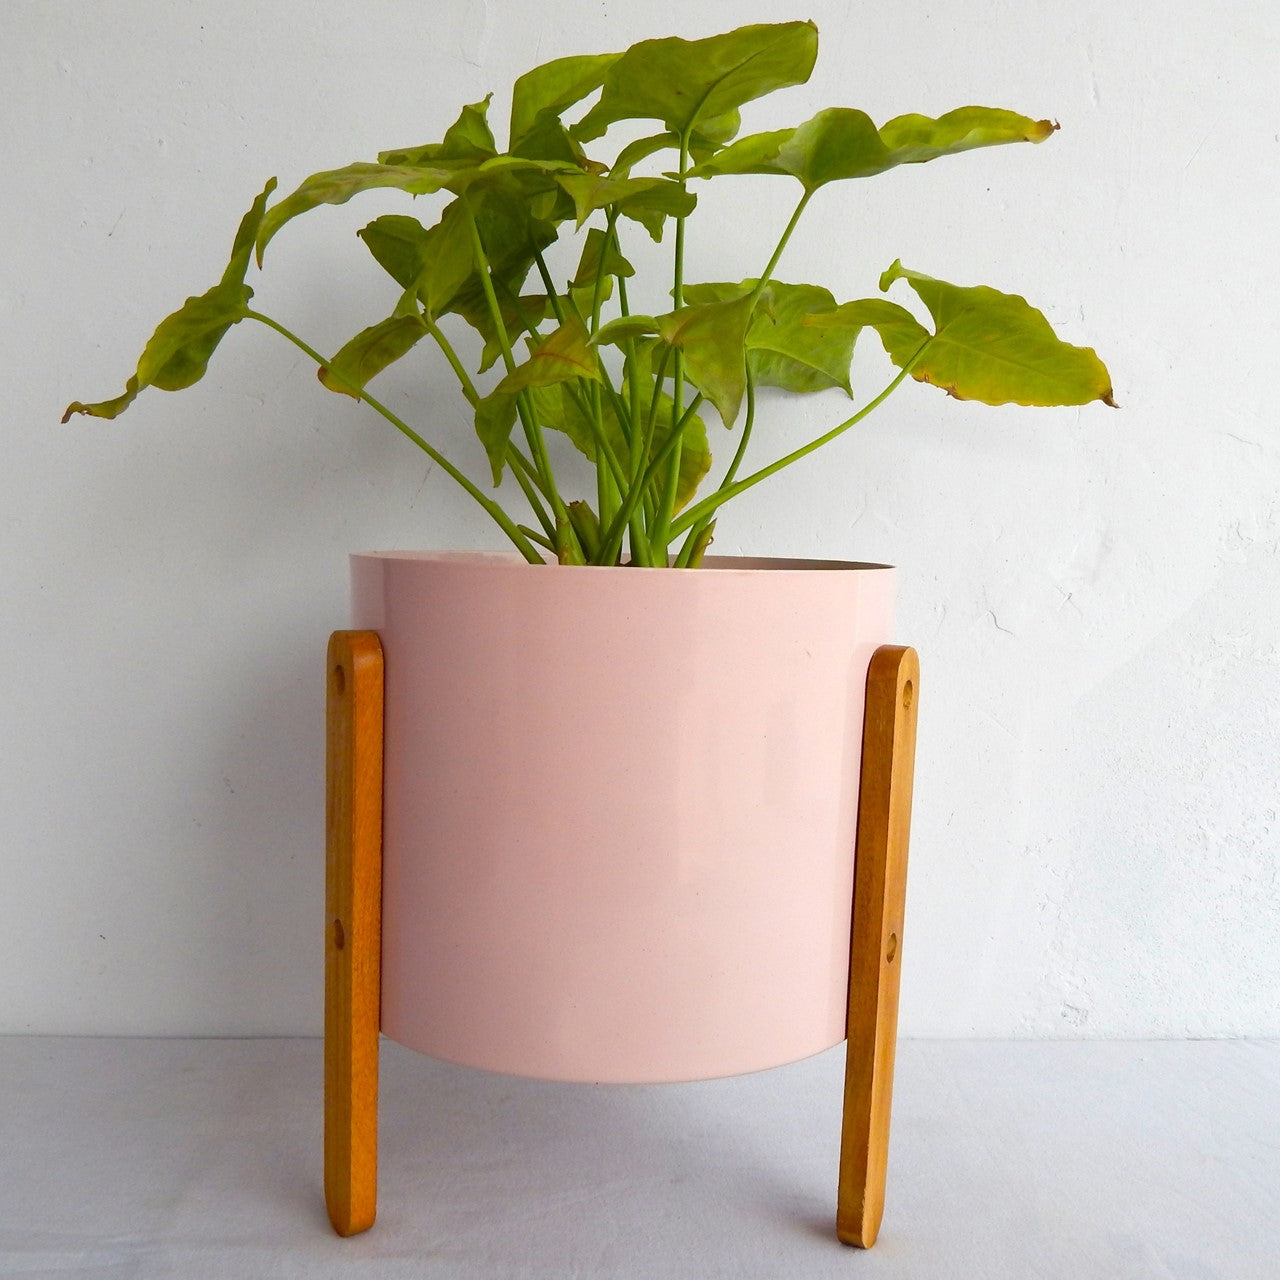 ecofynd 8 inches Edy Pink Metal Planter Pot with Wooden Stand Planter freeshipping - Ecofynd